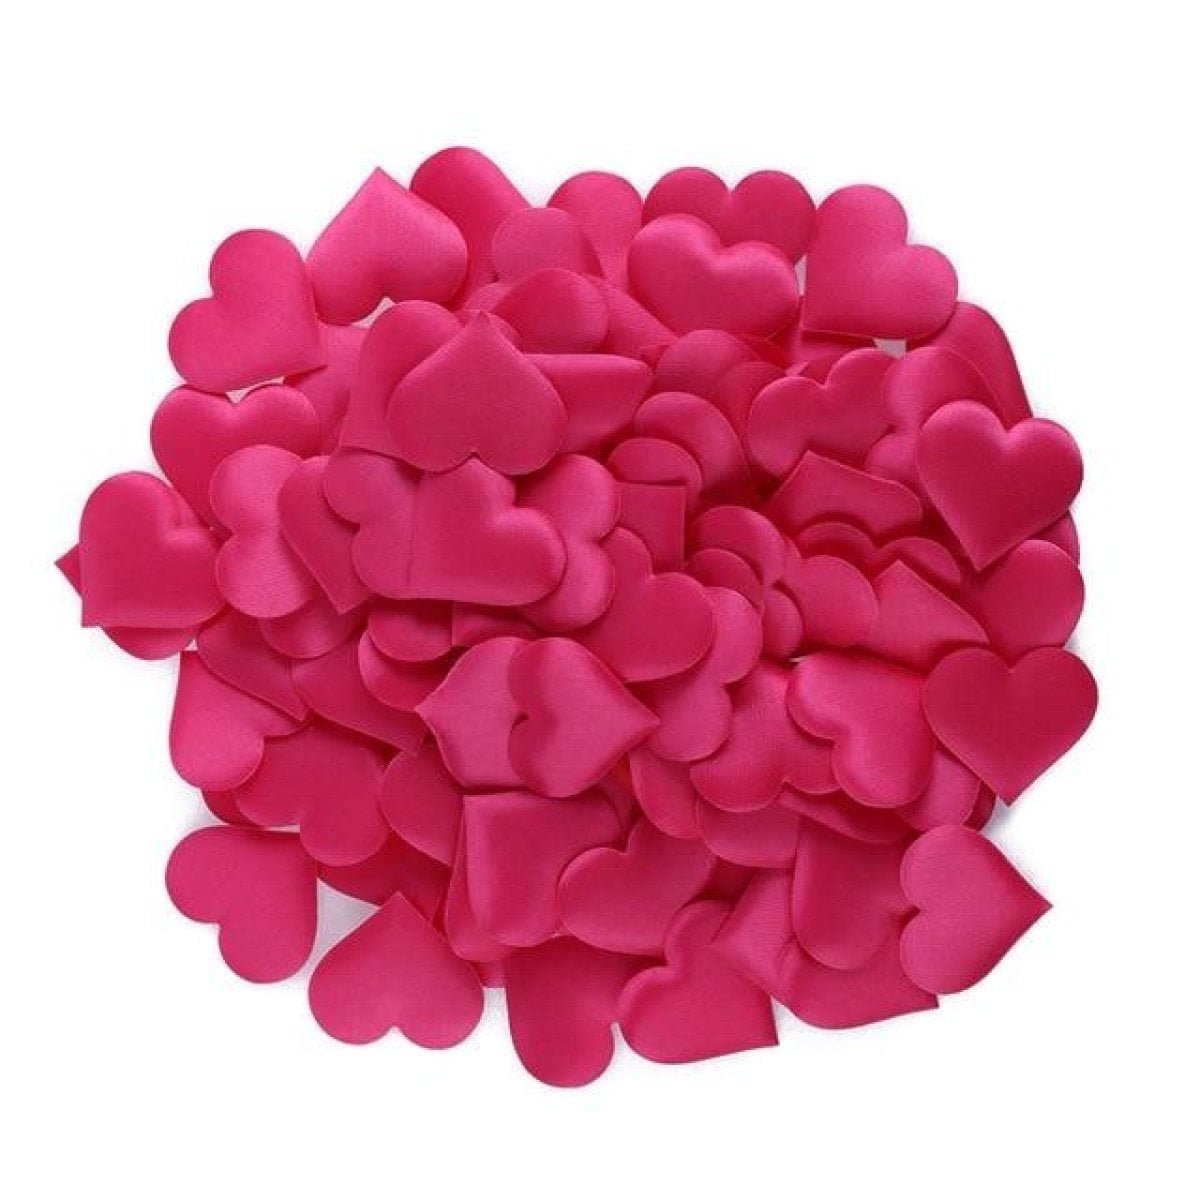 100pcs 2.0cm-3.5cm Fabric Love Heart Shape Petals For Wedding Table Decorations Confetti - Rose Pink 2cm - - Asia Sell